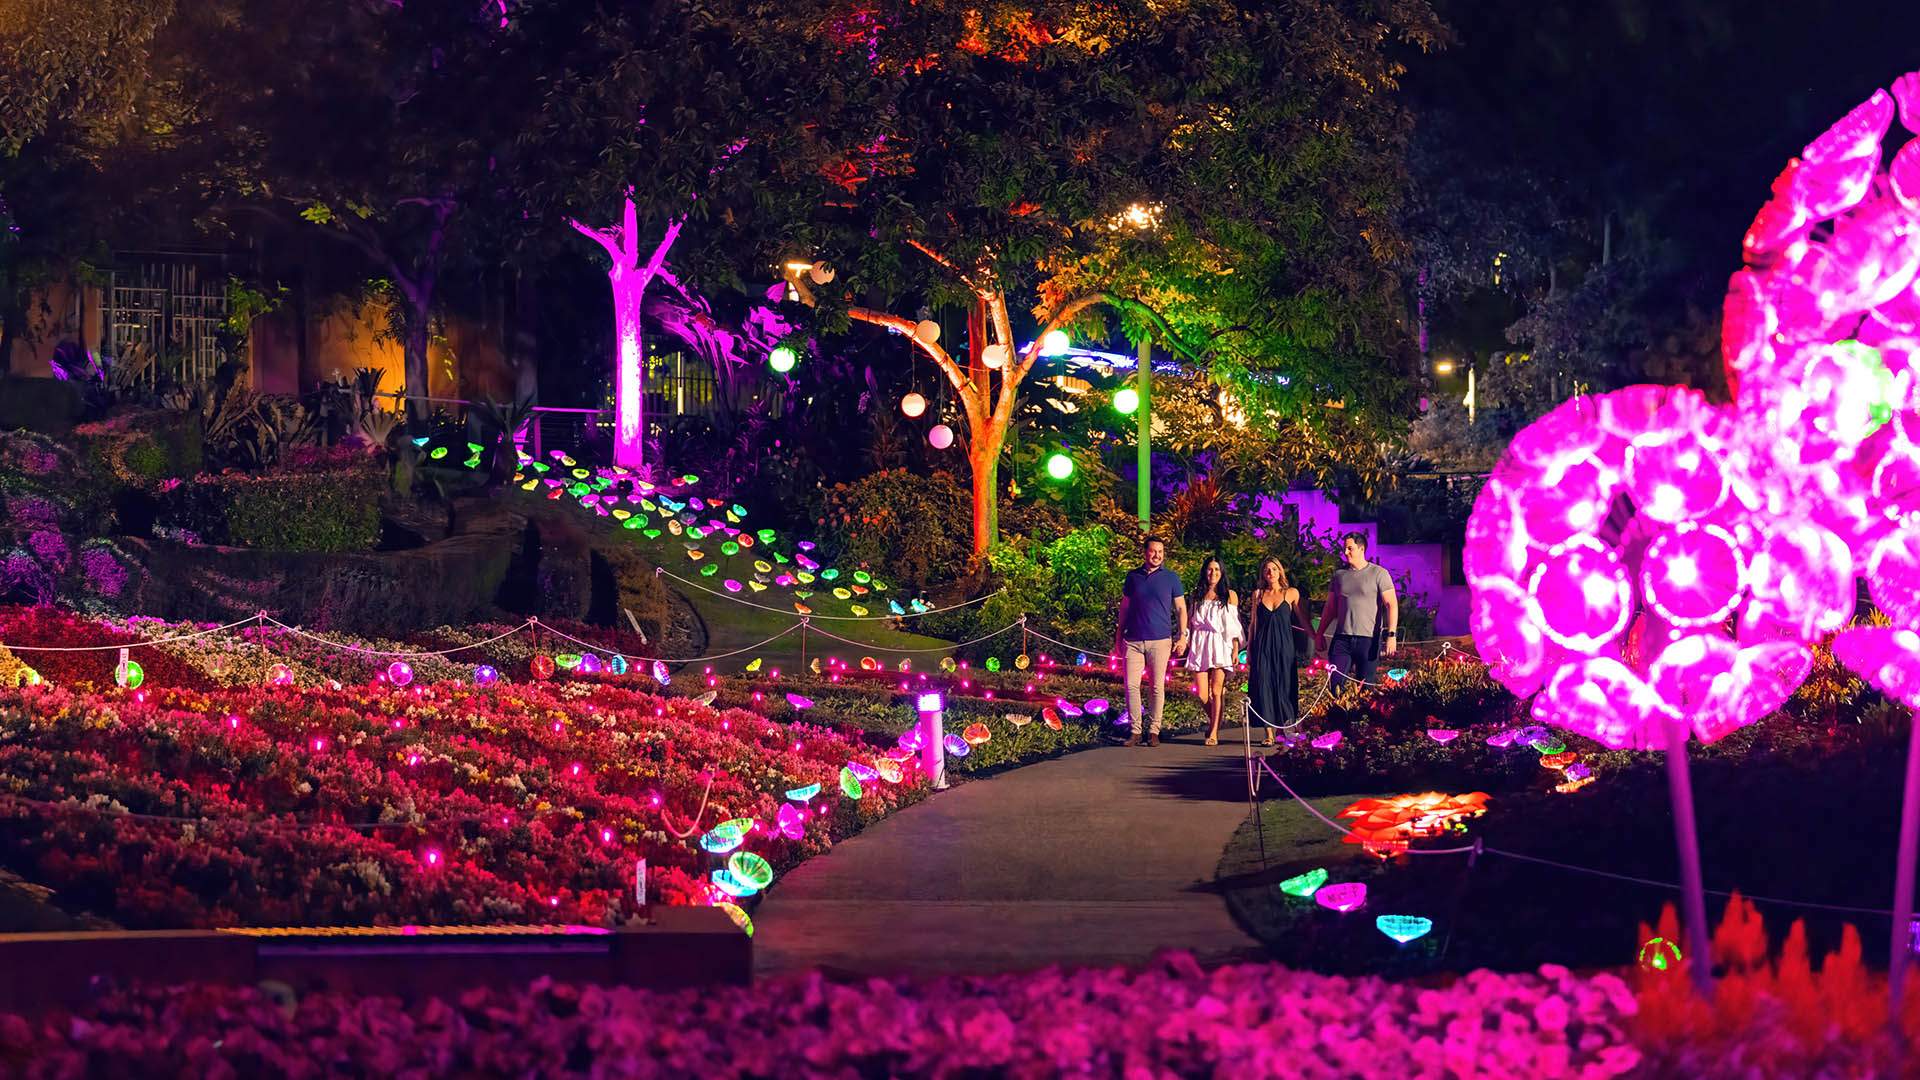 Roma Street Parkland's Dazzling Enchanted Garden Is Returning for Another Lit-Up Festive Season